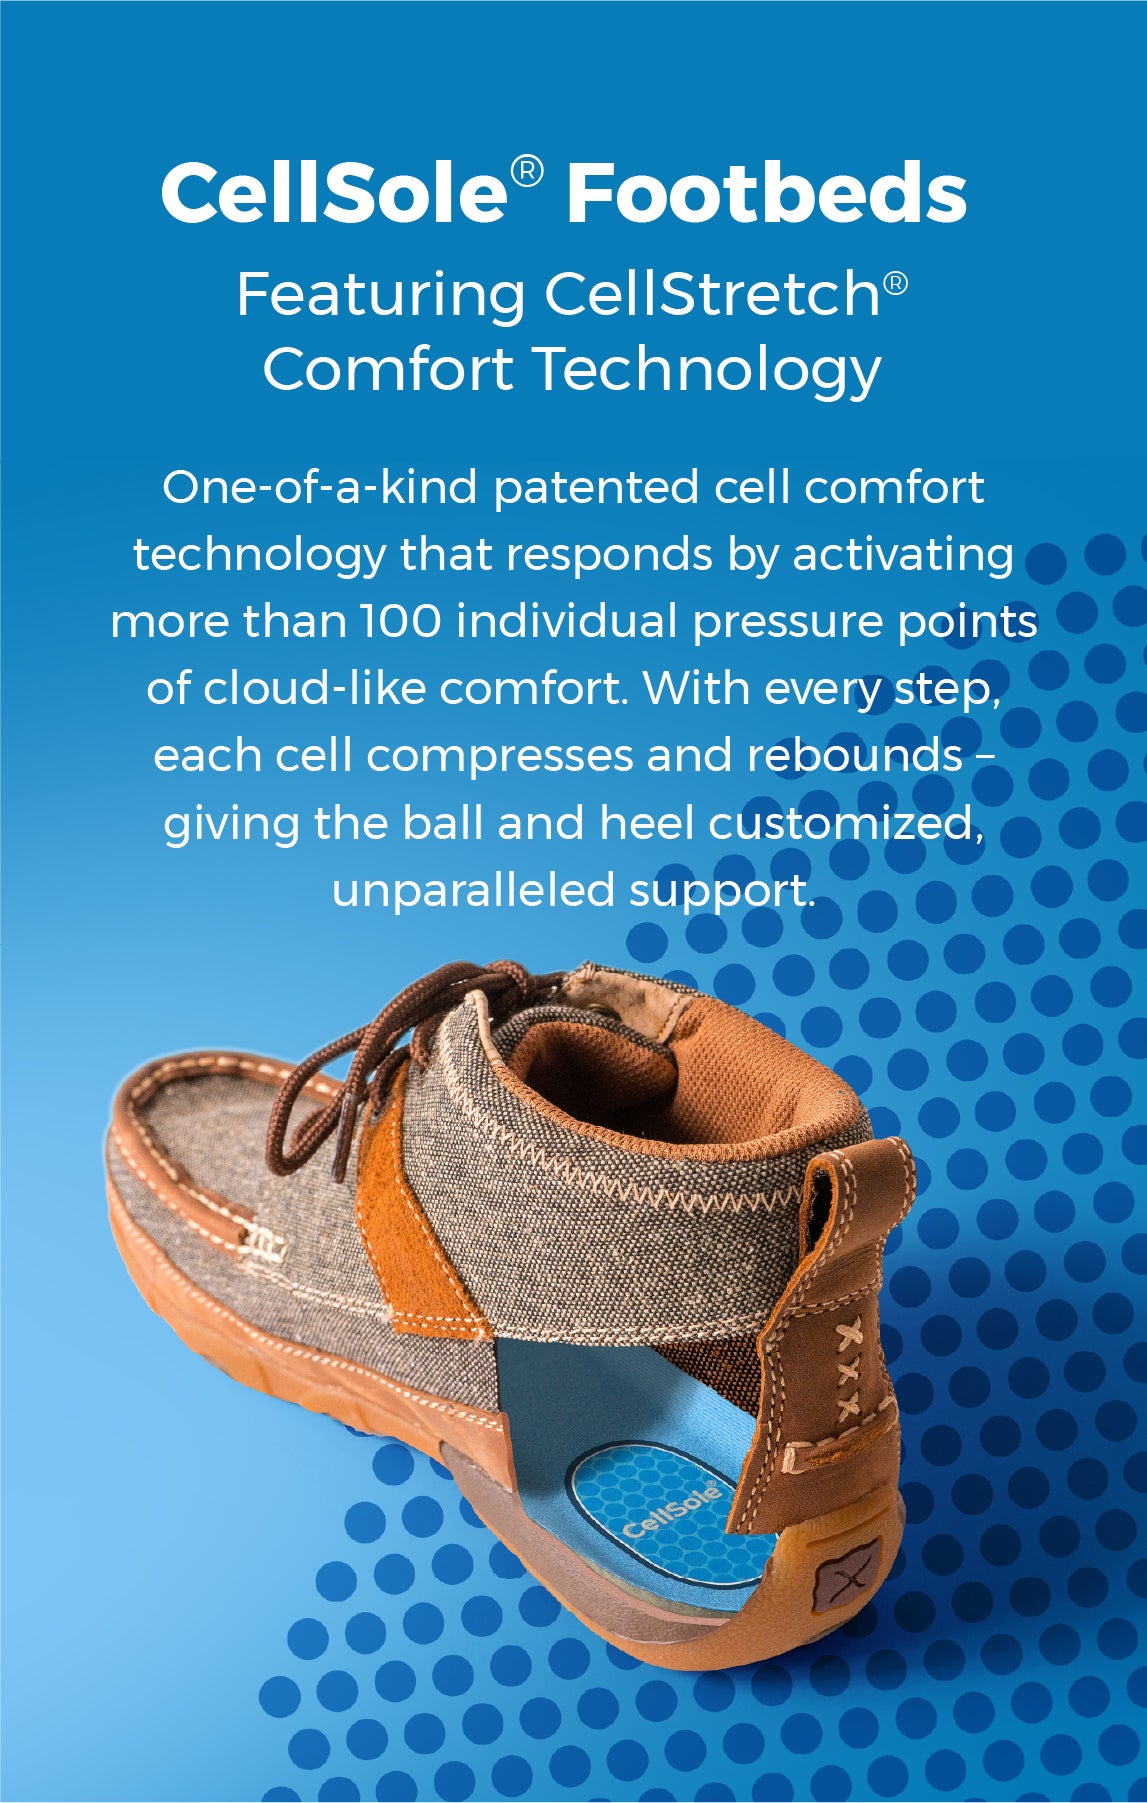 CellSole Footbeds - Featuring CellStretch Comfort Technology - One-of-a-kind patented cell comfort technology that responds by activating more than 100 individual pressure points of cloud-like comfort. With every step, each cell compresses and rebounds